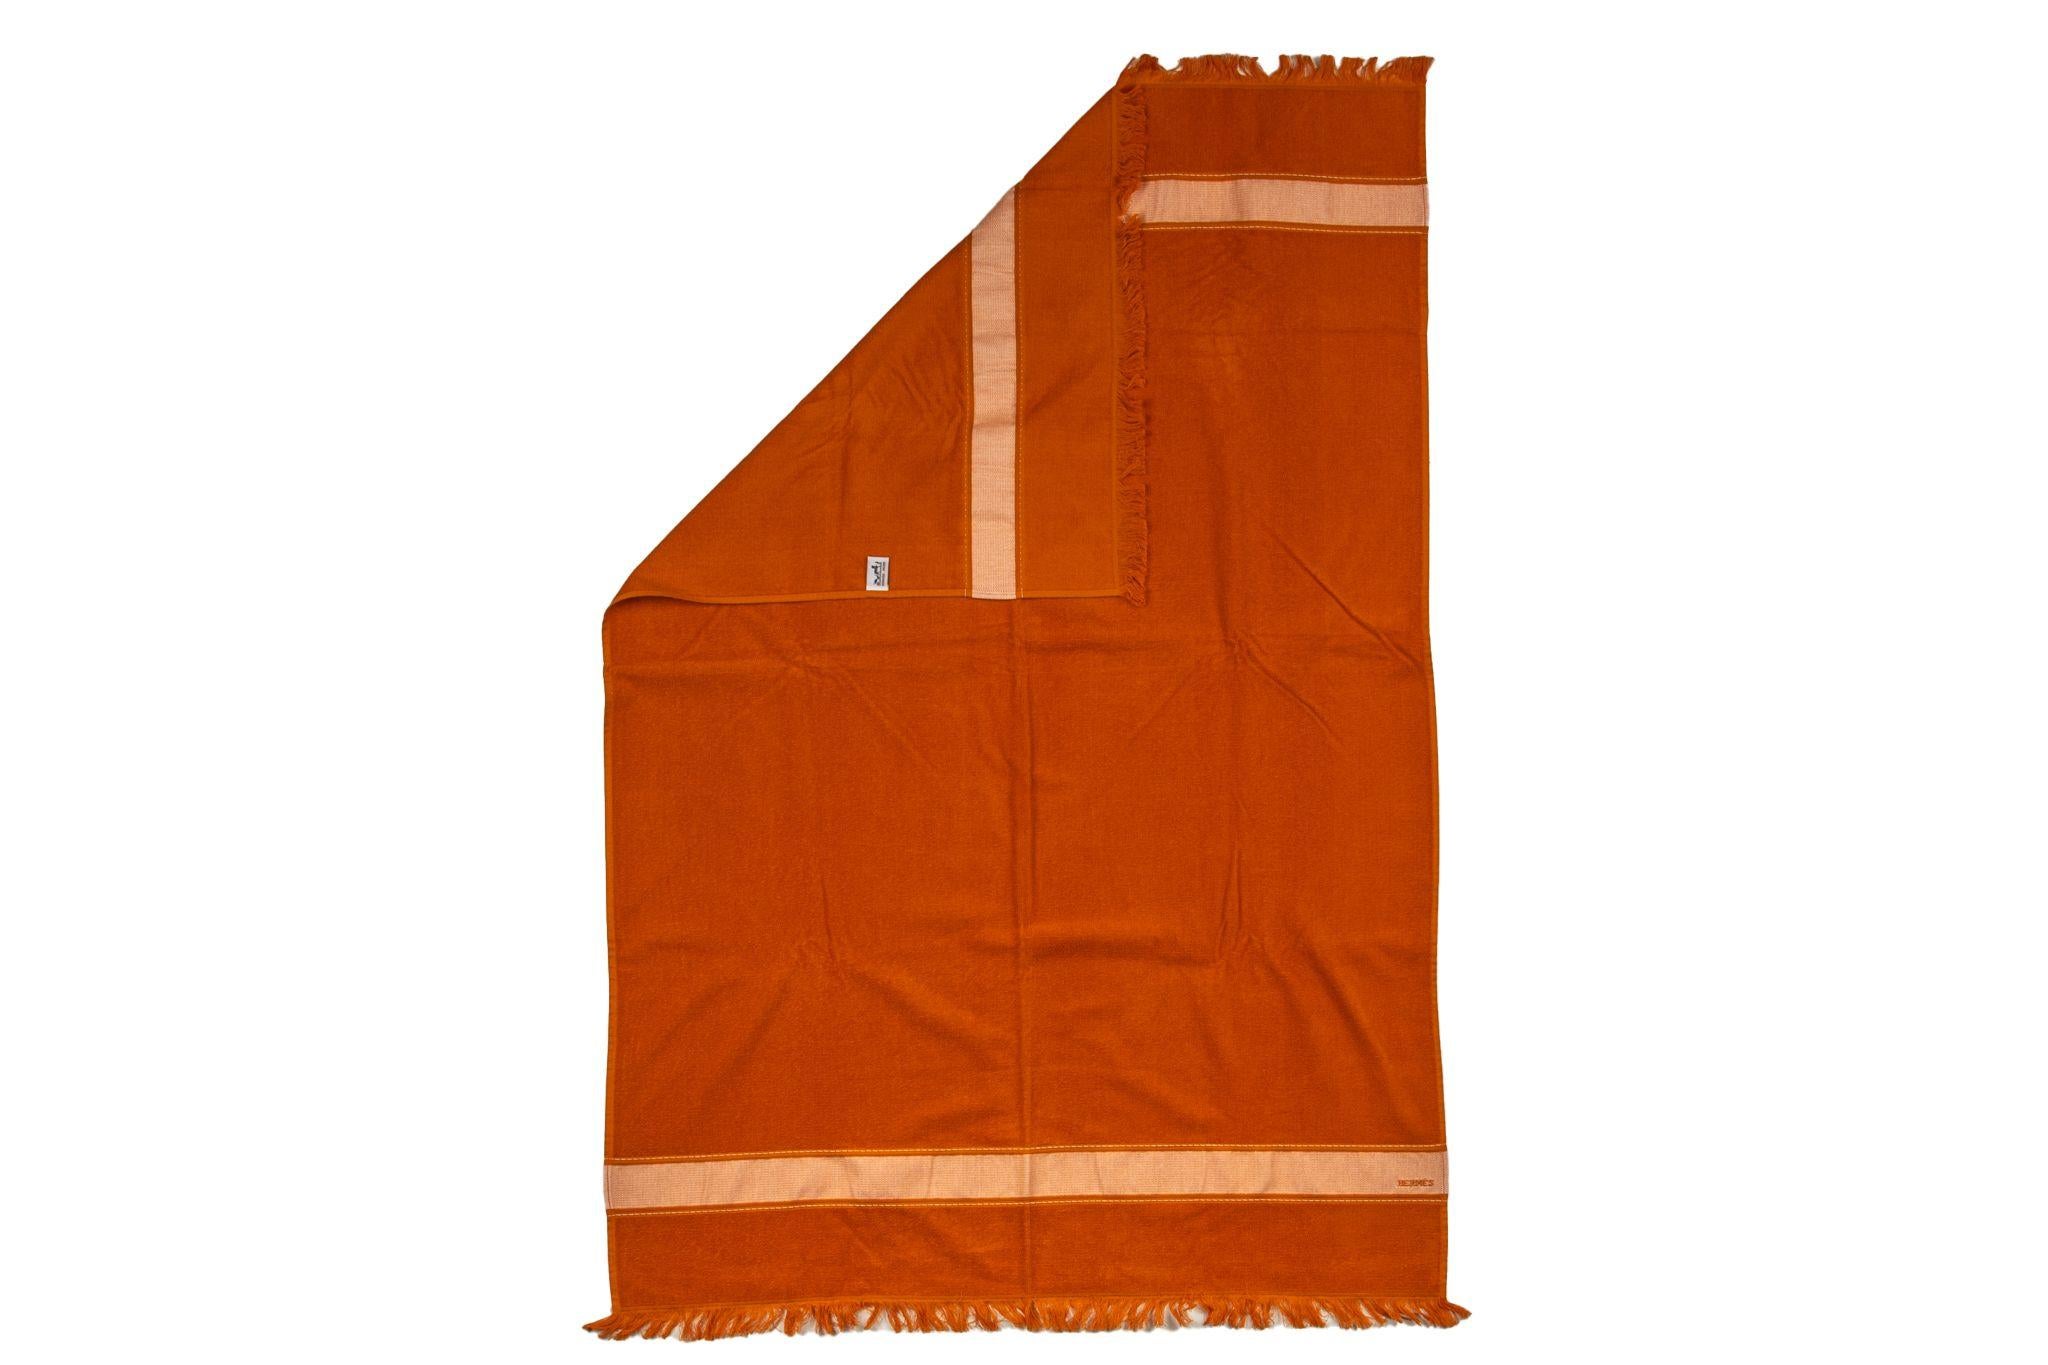 Hermès new rust cotton beach towel with fringes. Ne win unused condition.
Comes without box.